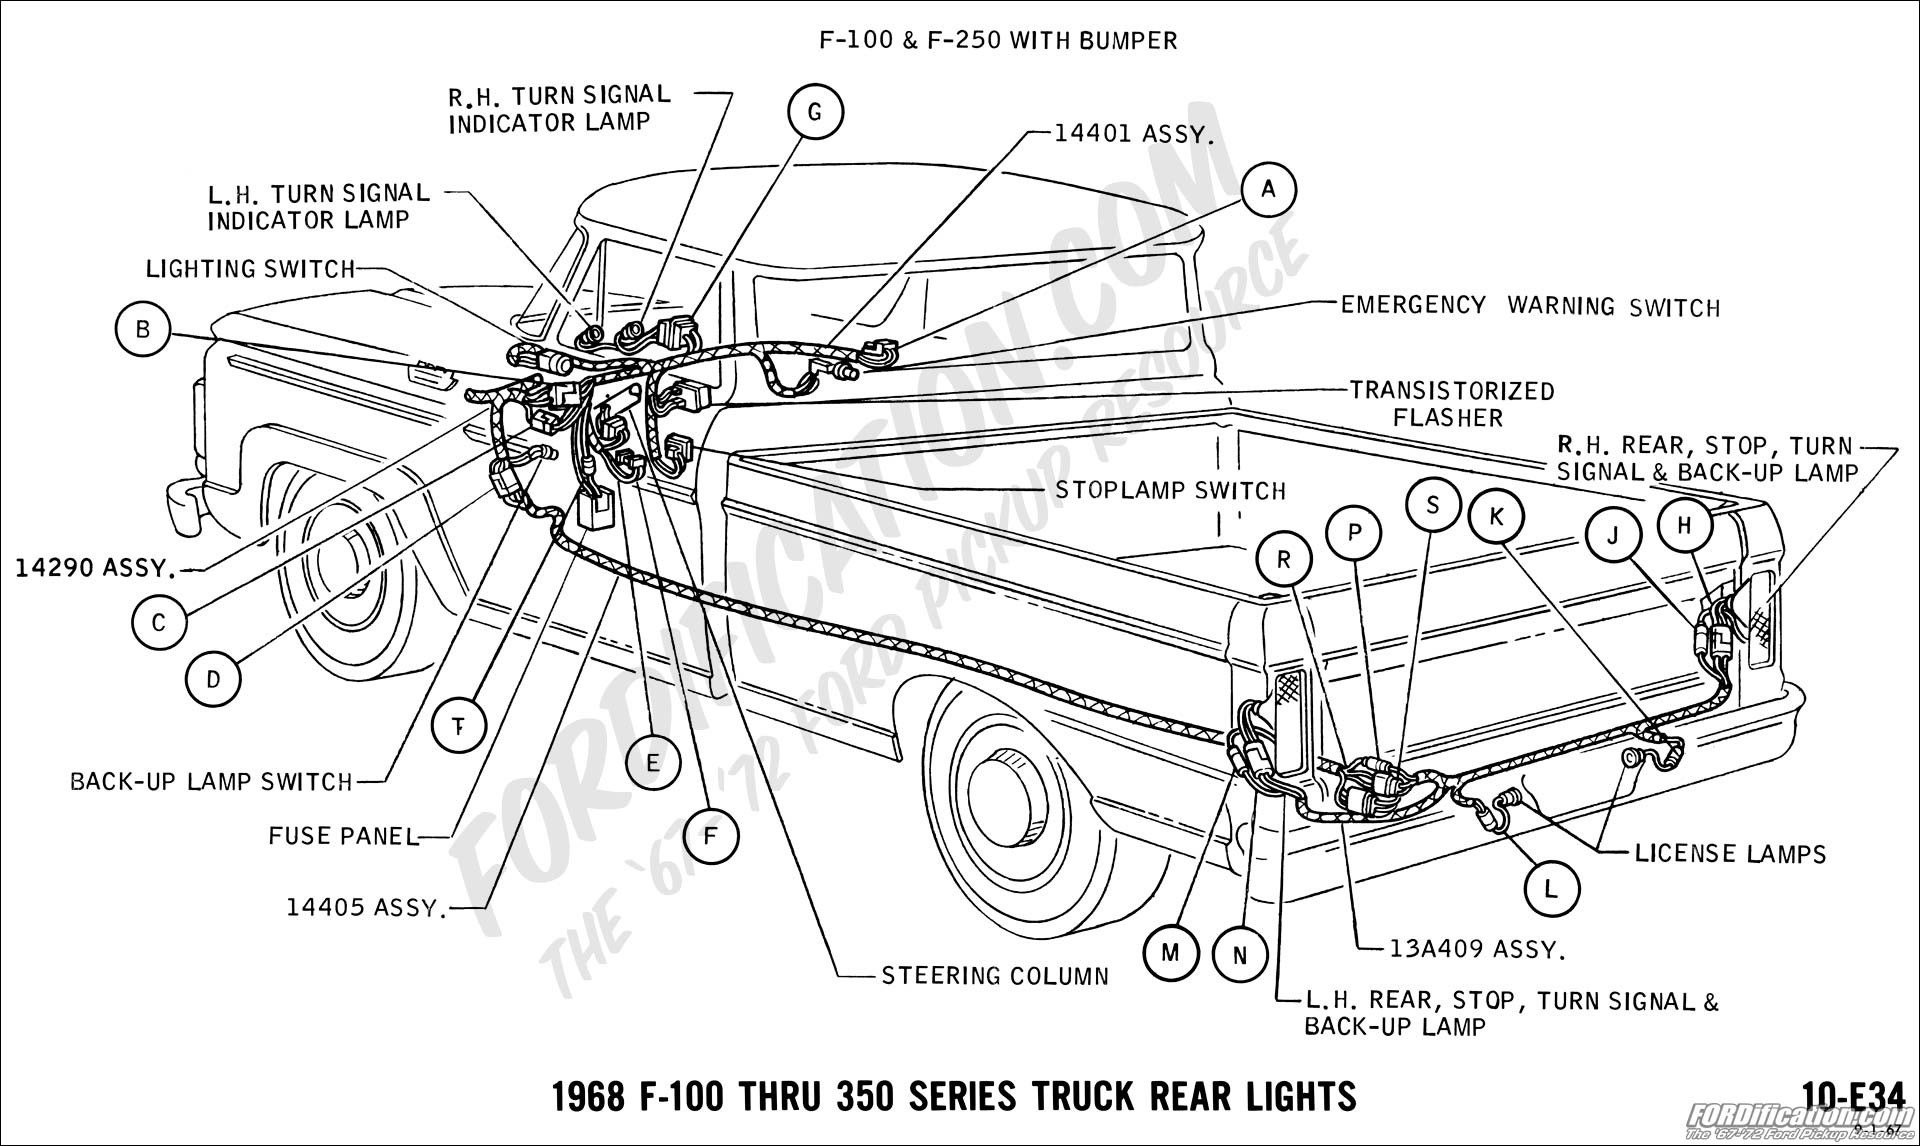 Diagram Of Car Under Hood Lifted fords ford Under the Hood Pinterest Of Diagram Of Car Under Hood